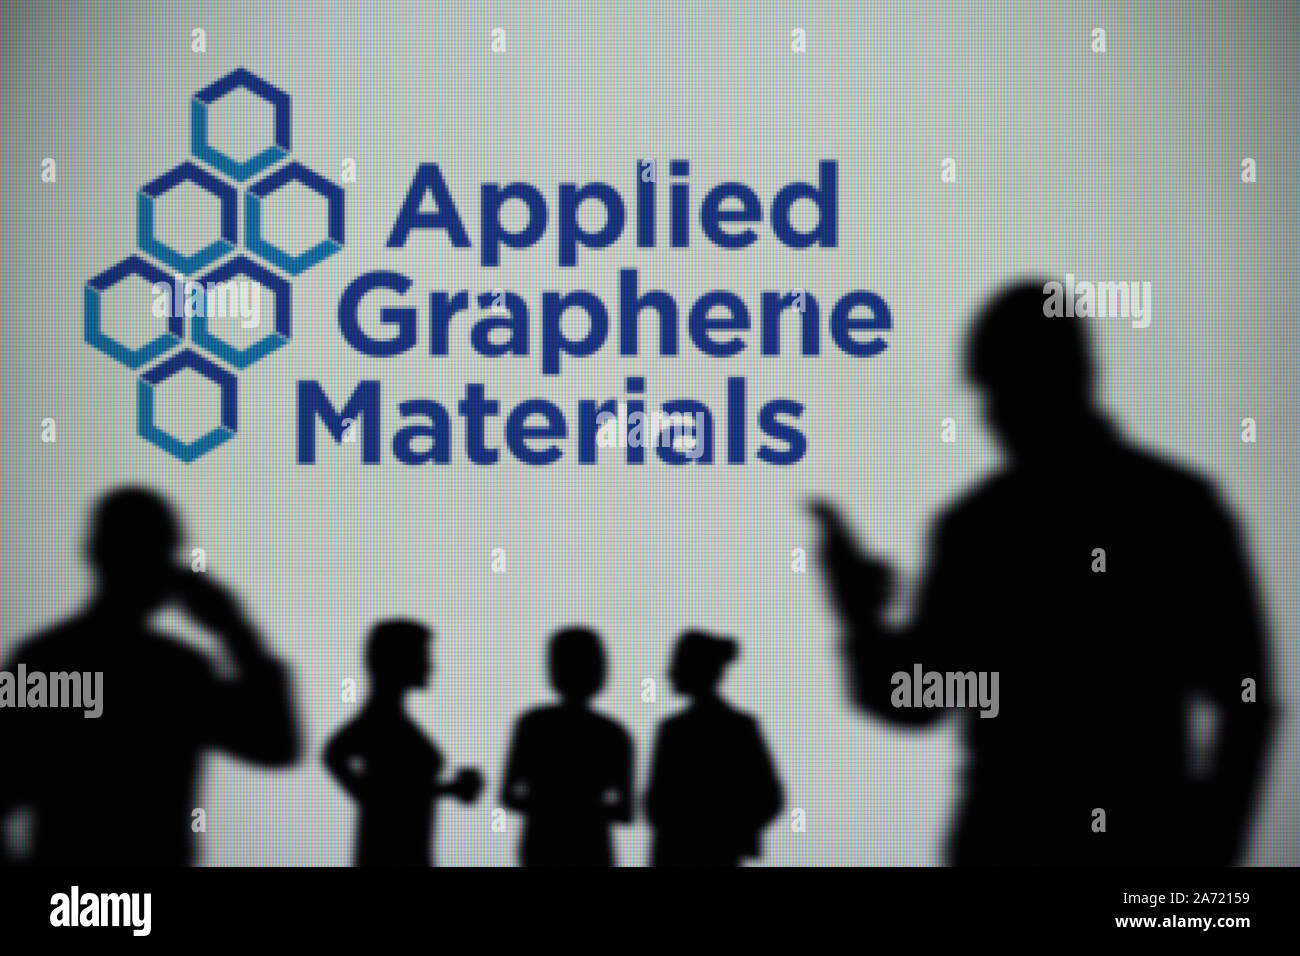 The Applied Graphene Materials logo is seen on an LED screen in the background while a silhouetted person uses a smartphone (Editorial use only) Stock Photo